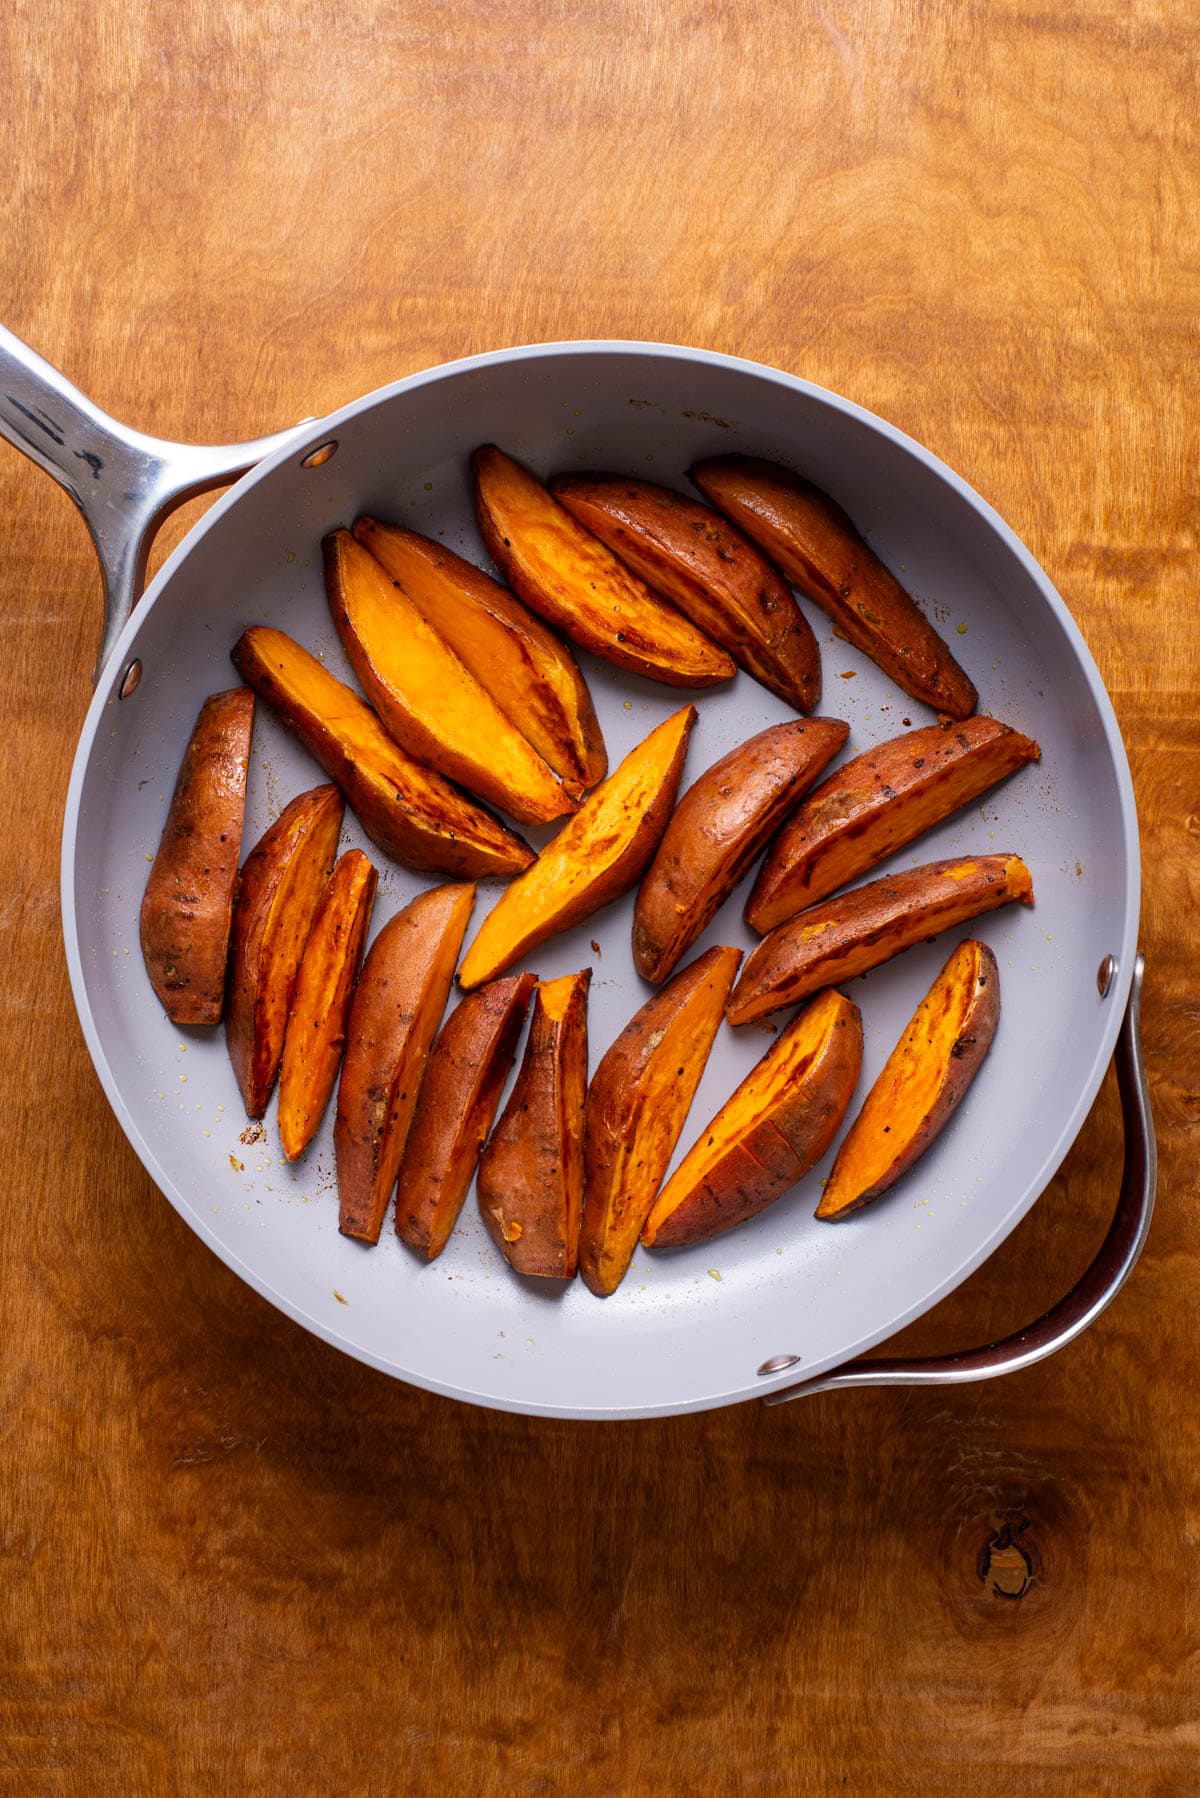 Cooked sweet potato wedges in a skillet.